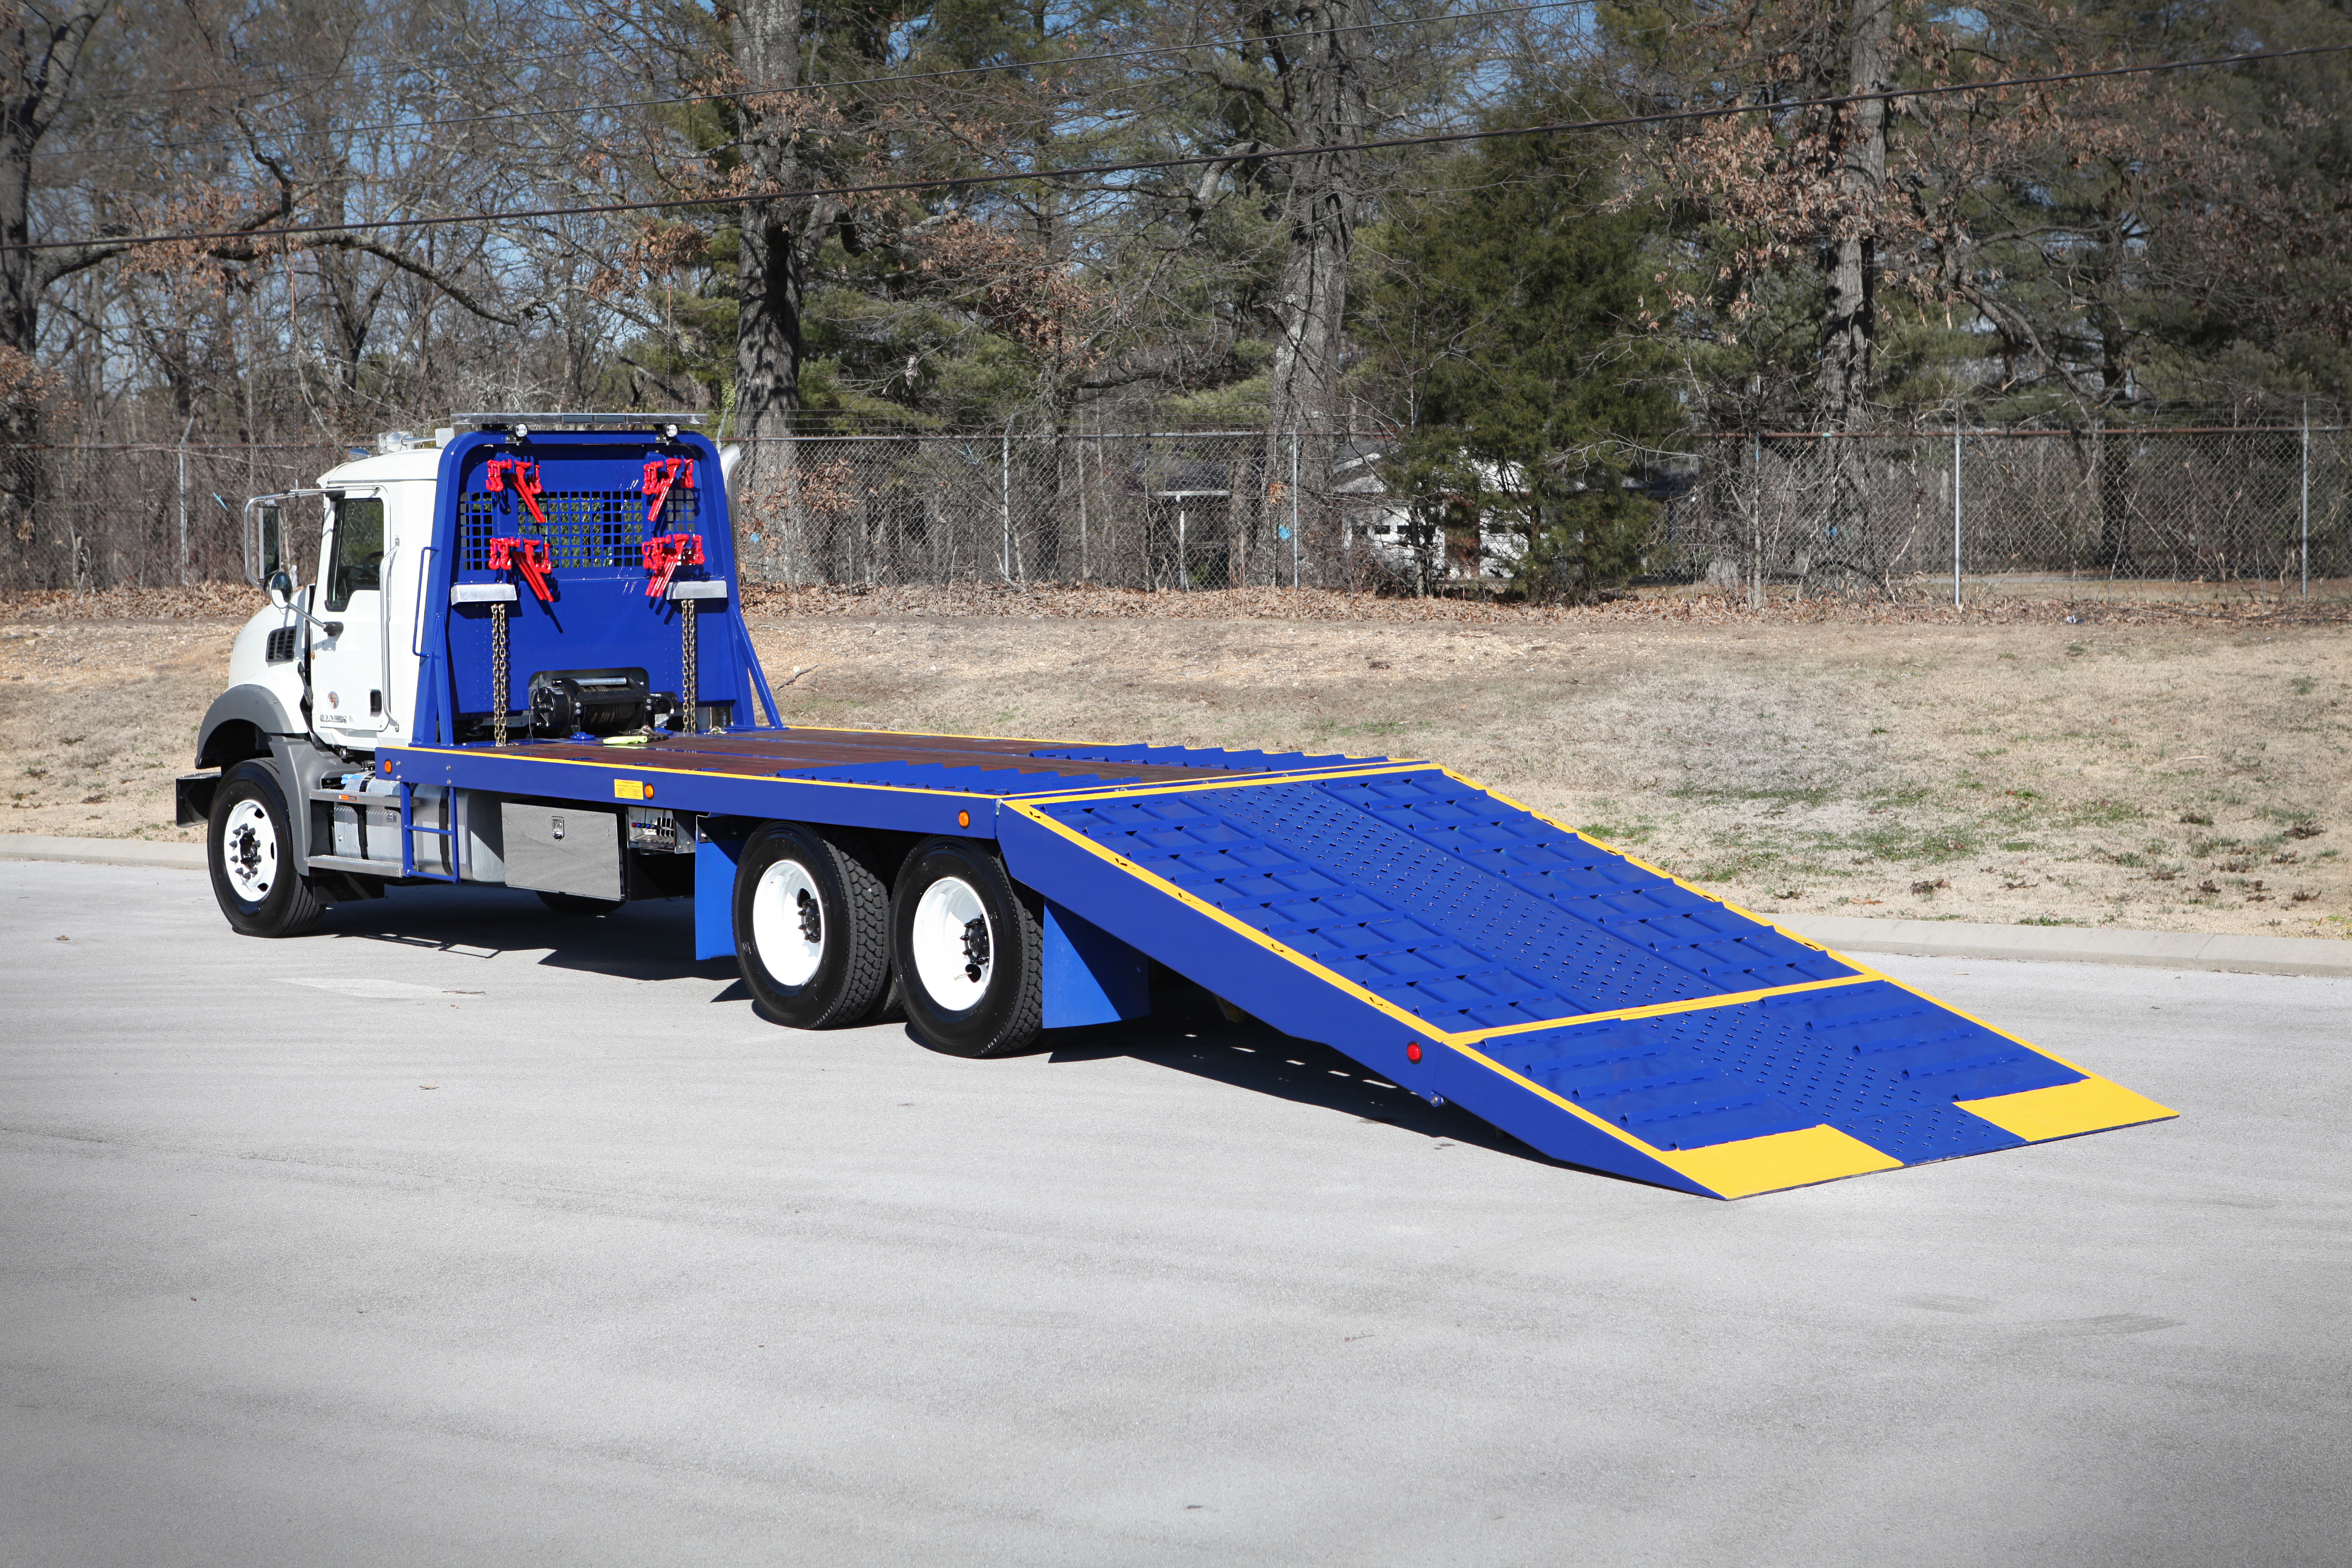 Titan® FRF in the unfolded position for loading and unloading of heavy equipment.